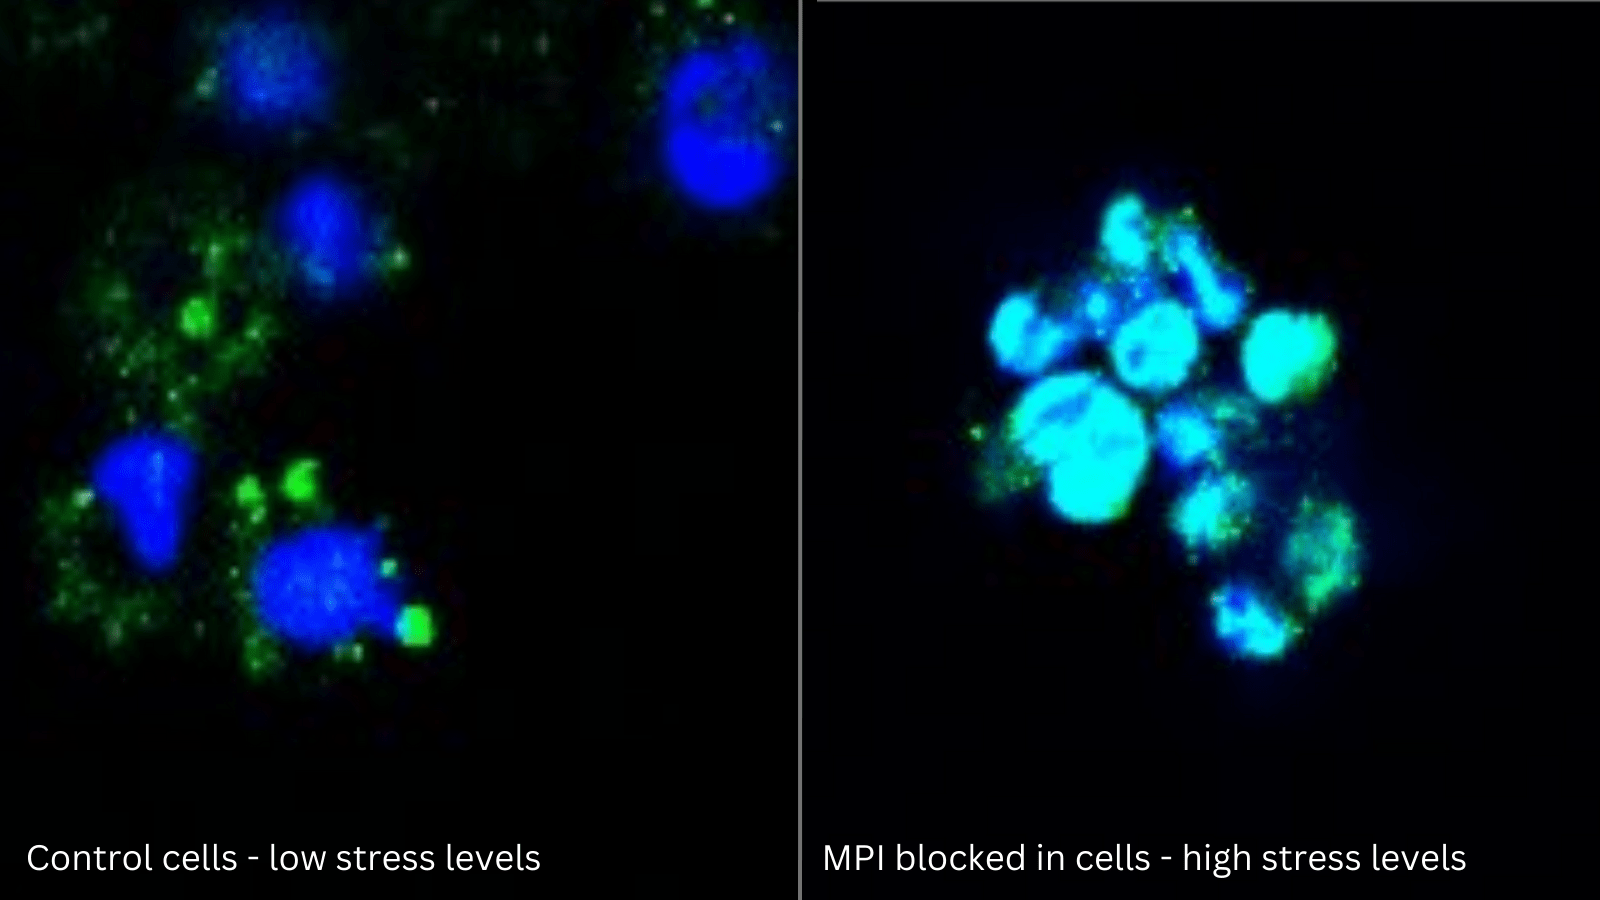 Fluorescence microscope image of cells. Cell nuclei are shown in blue and ATF6, a protein involved in cell stress, is shown in green. When MPI is inhibited, ATF6 moves into the nucleus, demonstrating that the cells are stressed.